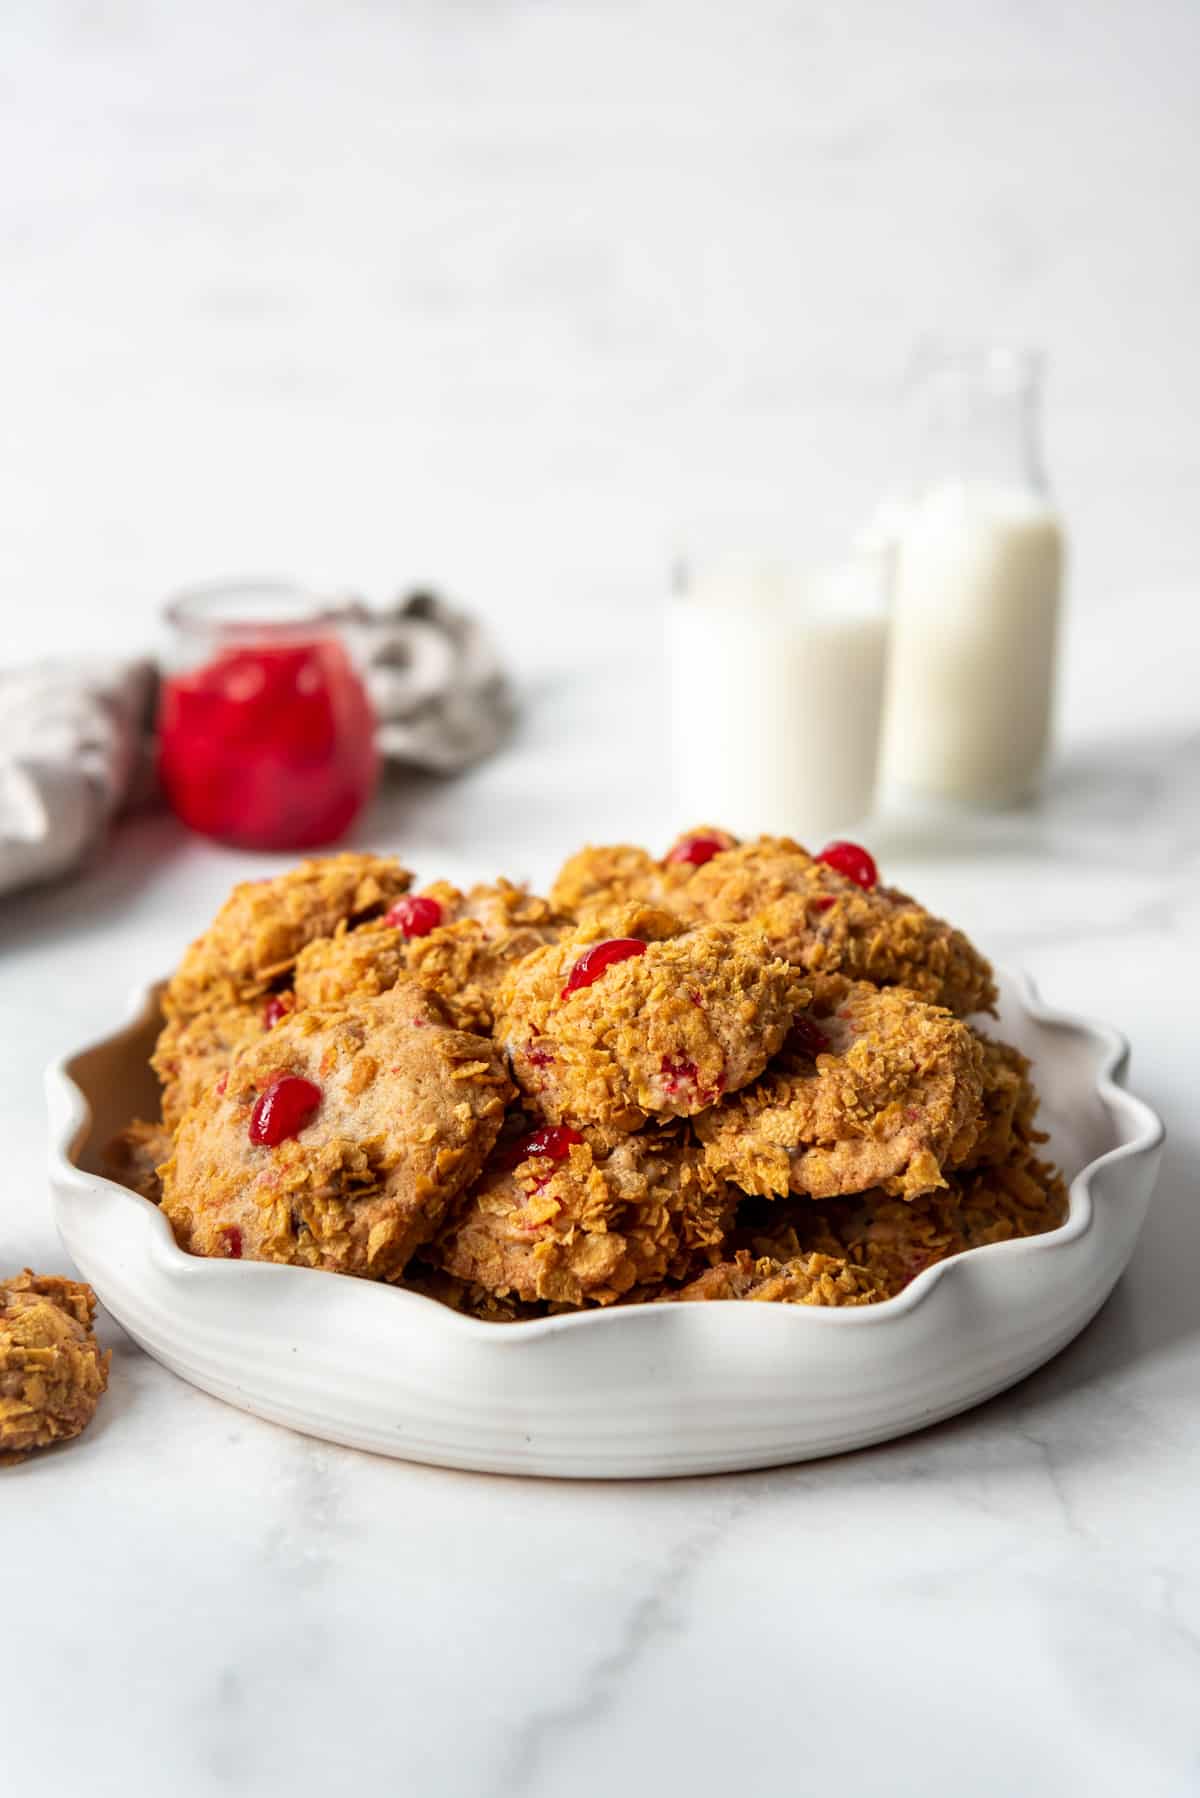 Cherry, date, and pecan cookies with crushed cornflakes on the outside in front of glasses of milk.